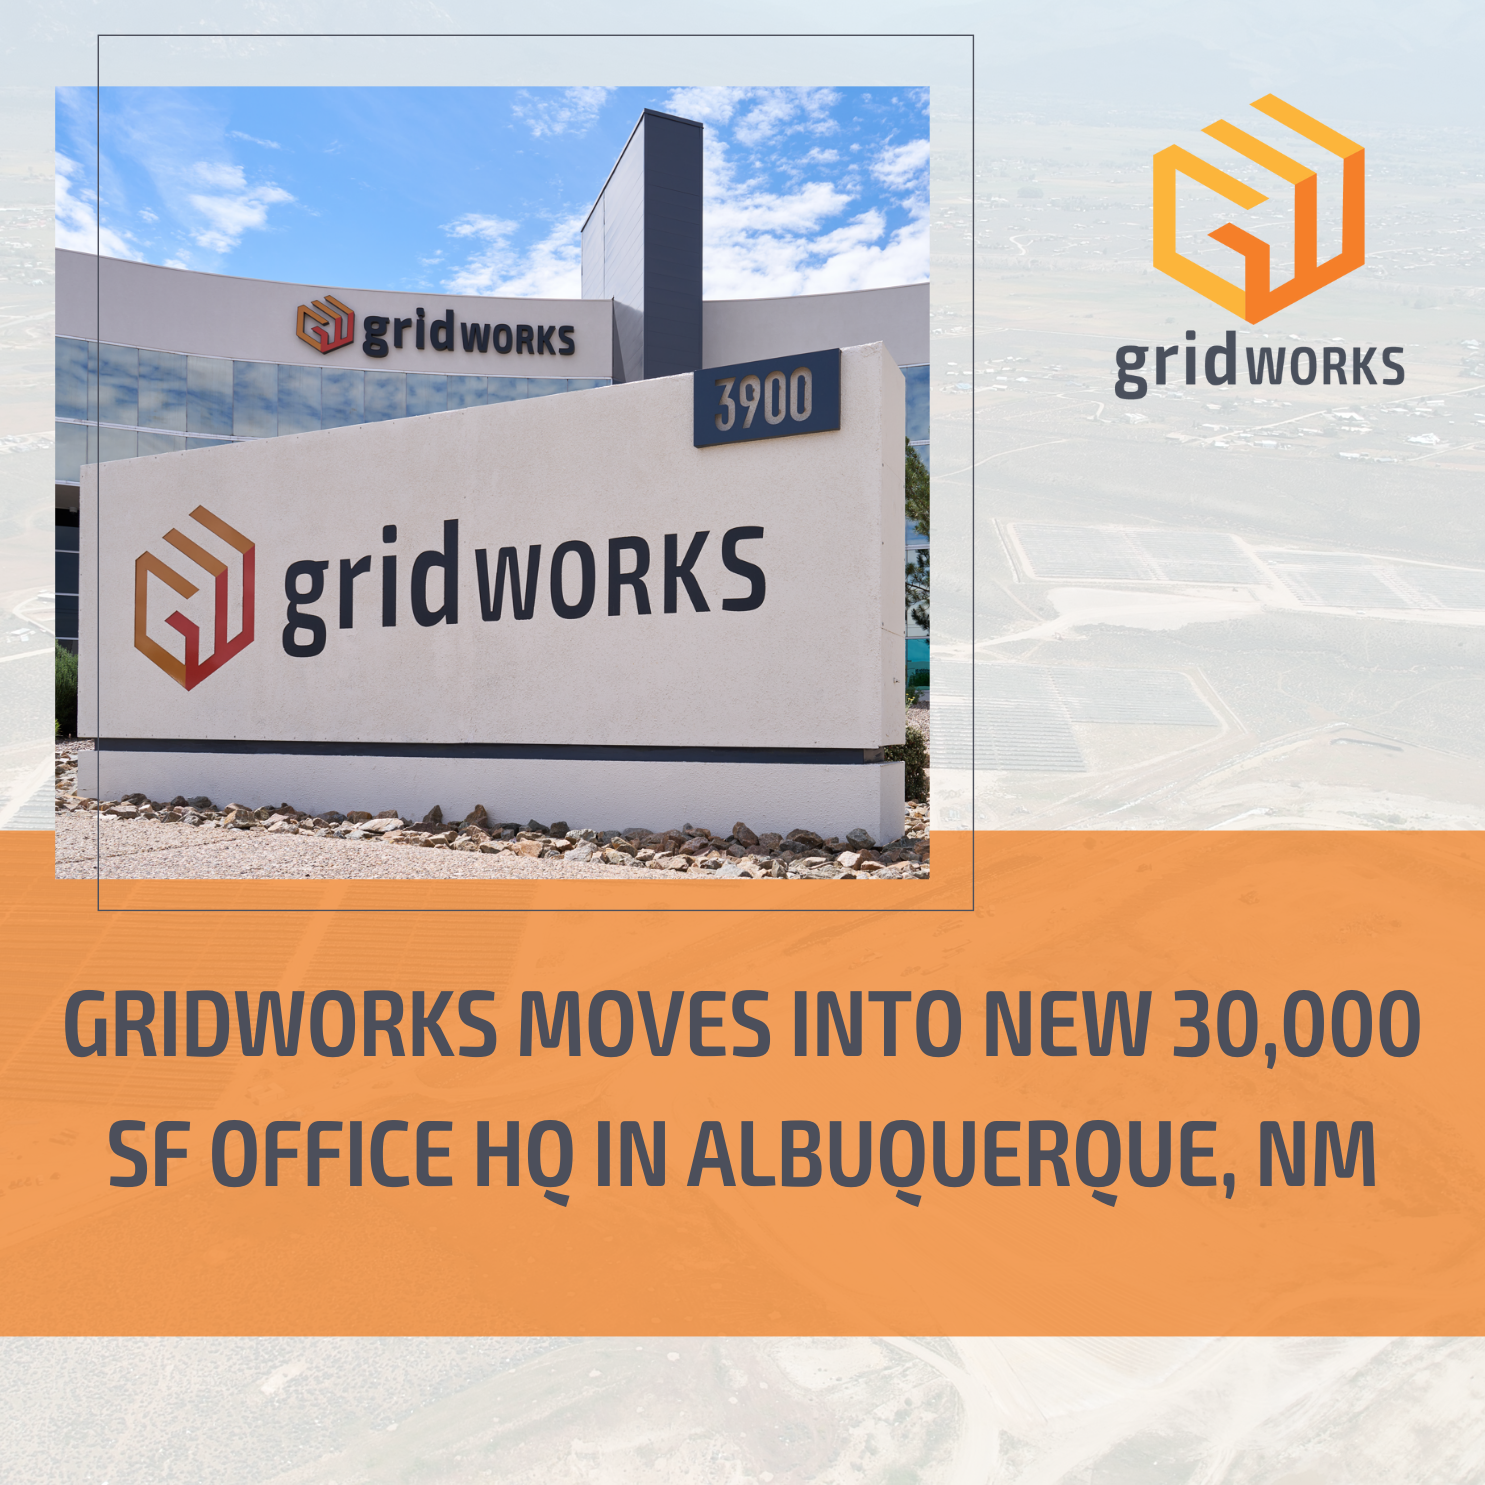 Gridworks Moves To New Office Headquarters Located In The Jefferson Corridor Of Albuquerque, New Mexico